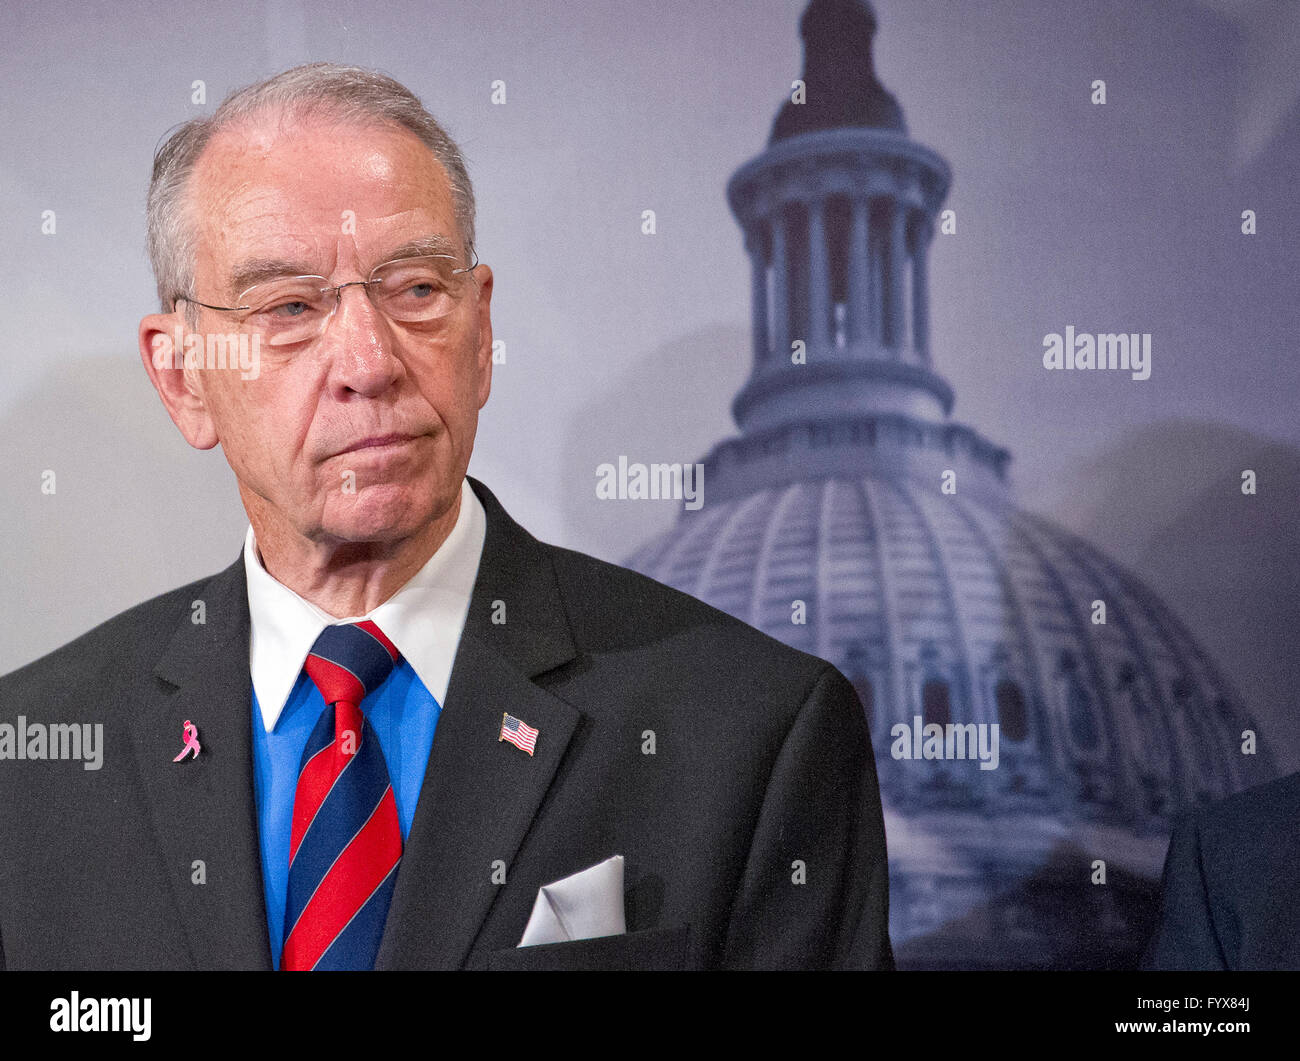 United States Senator Chuck Grassley (Republican of Iowa), Chairman, US Senate Judiciary Committee, makes remarks during a press conference calling on the US Senate Republican leadership to bring to the floor the bipartisan Sentencing Reform and Corrections Act, a bill to reduce some mandatory minimum sentences and apply those changes retroactively to inmates currently serving unfair sentences. Credit: Ron Sachs/CNP - NO WIRE SERVICE - Stock Photo